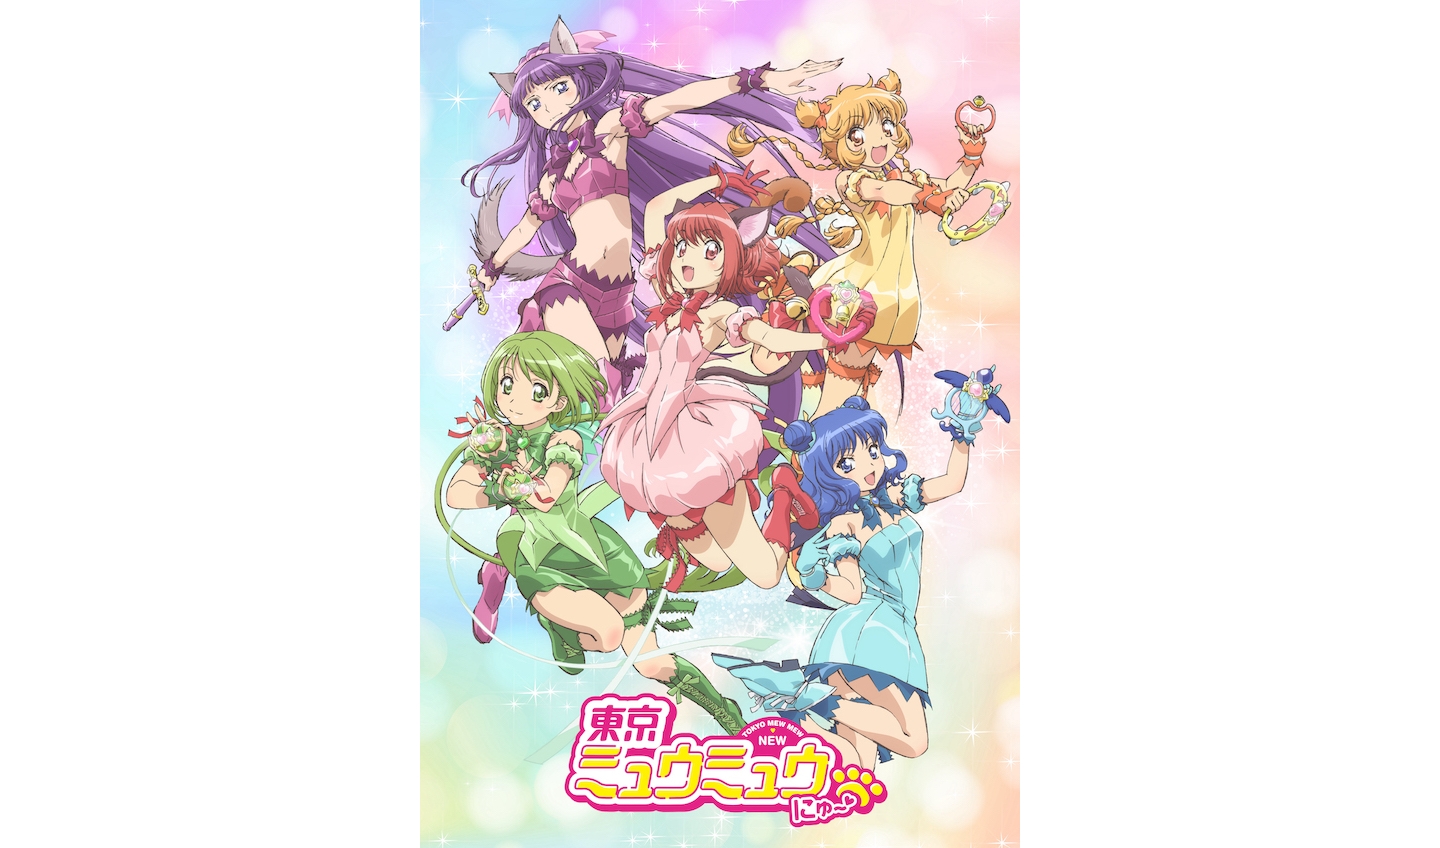 Where to watch Tokyo Mew Mew Mew and streaming release explained